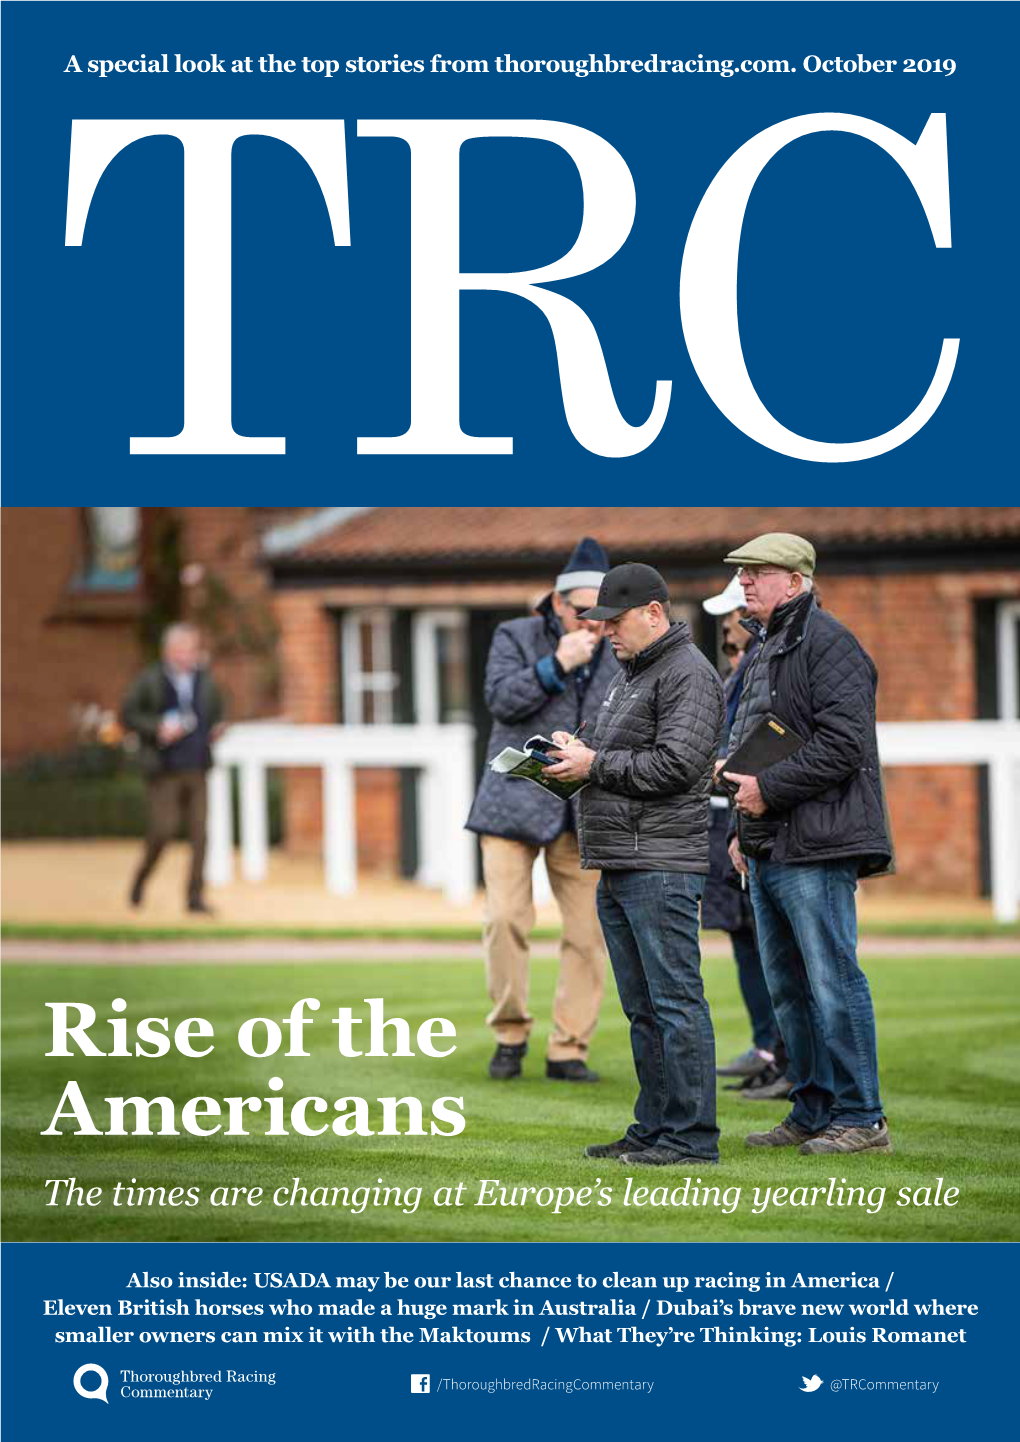 Rise of the Americans the Times Are Changing at Europe’S Leading Yearling Sale